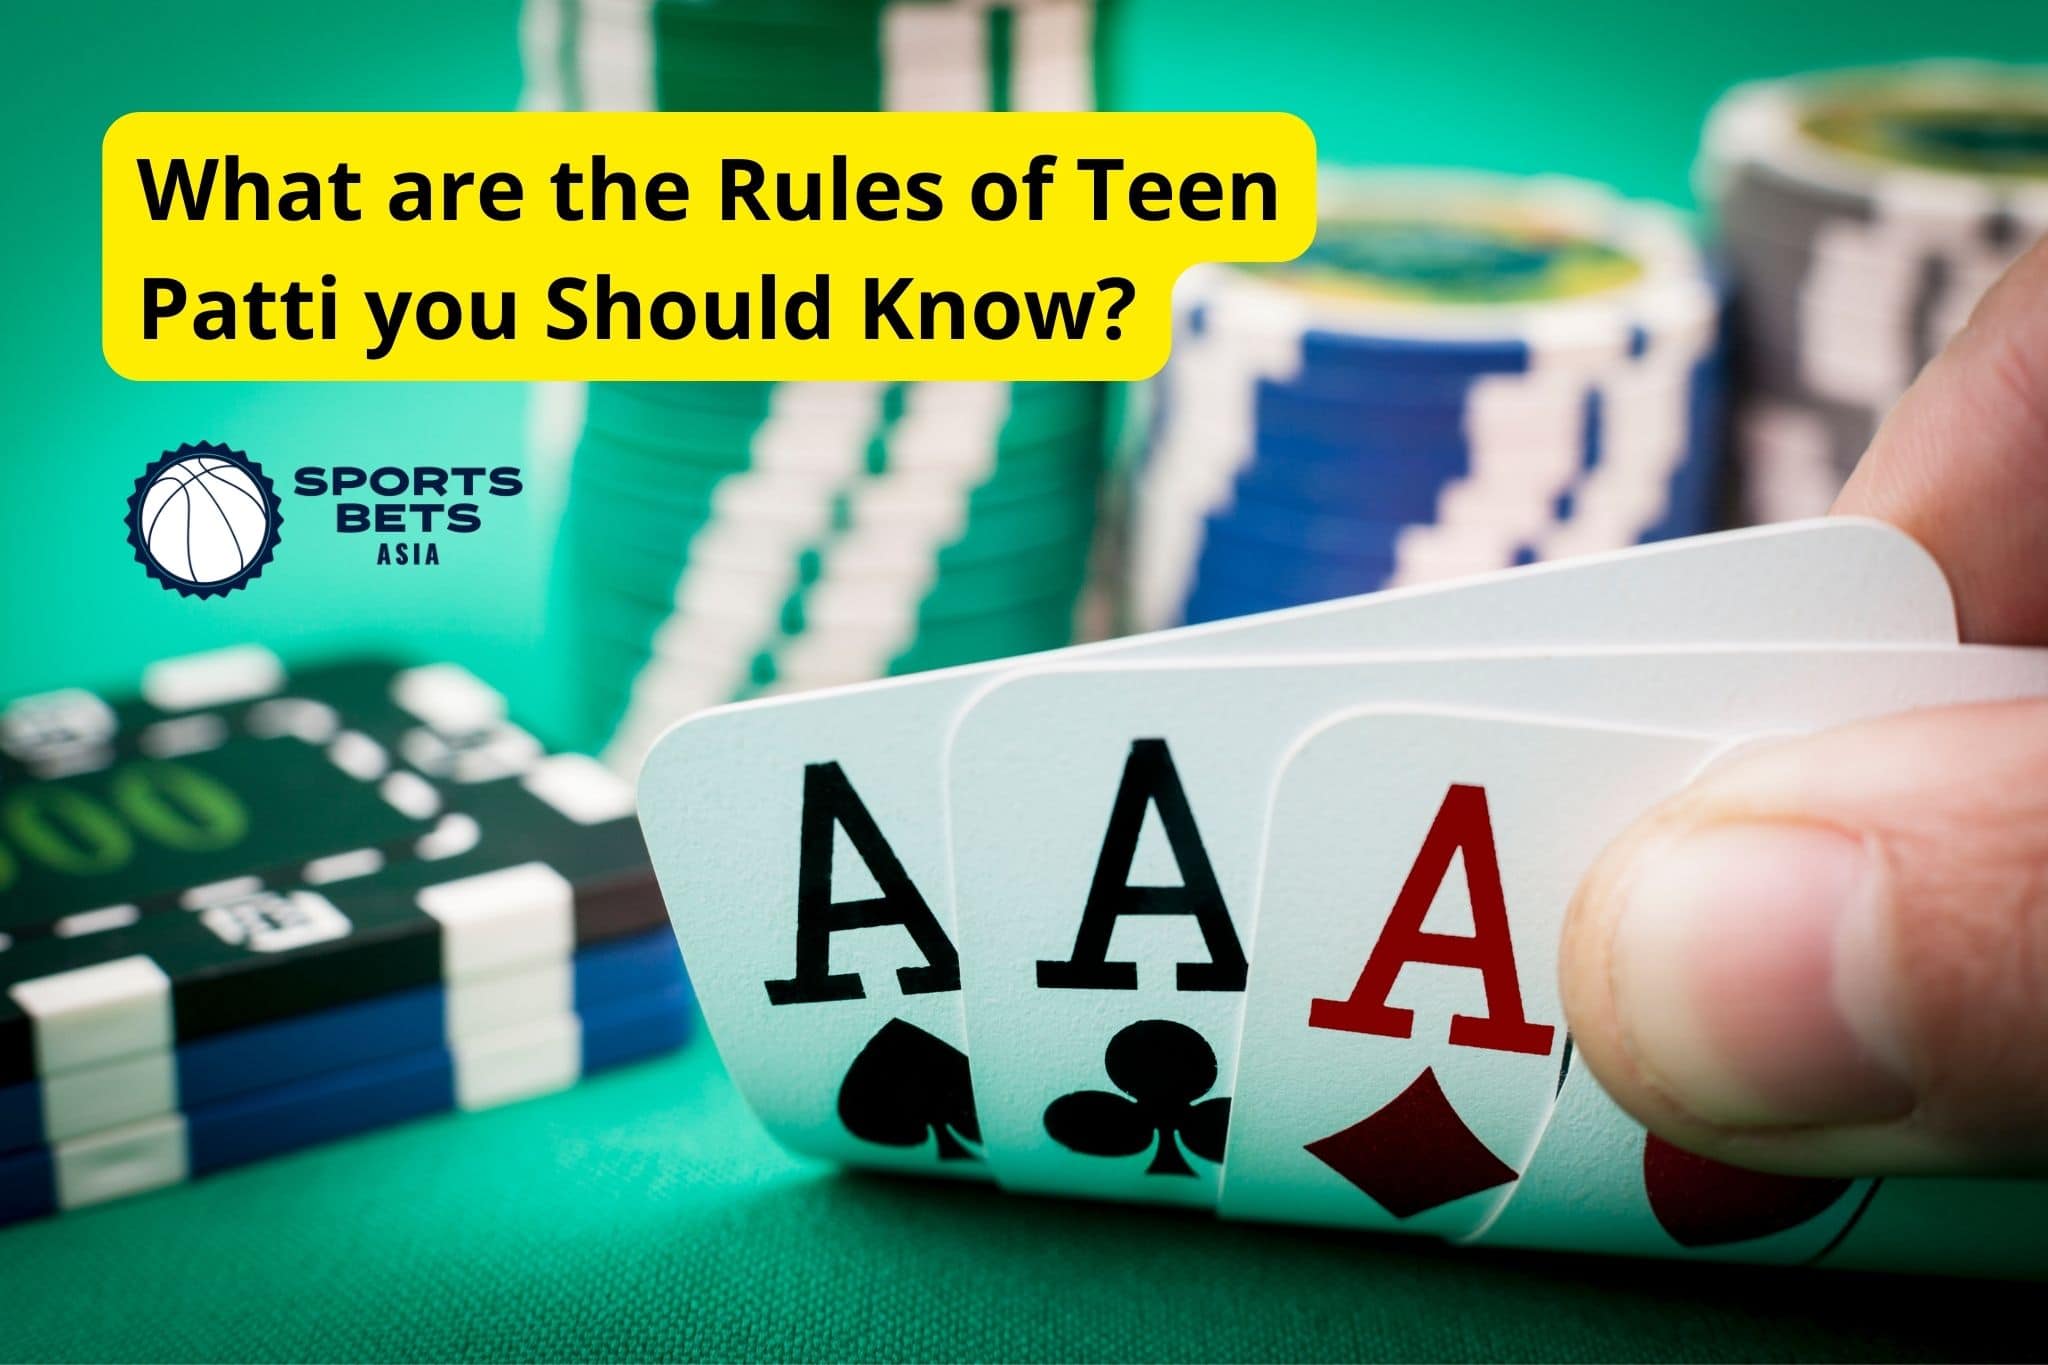 What are the Rules of Teen Patti you should Know